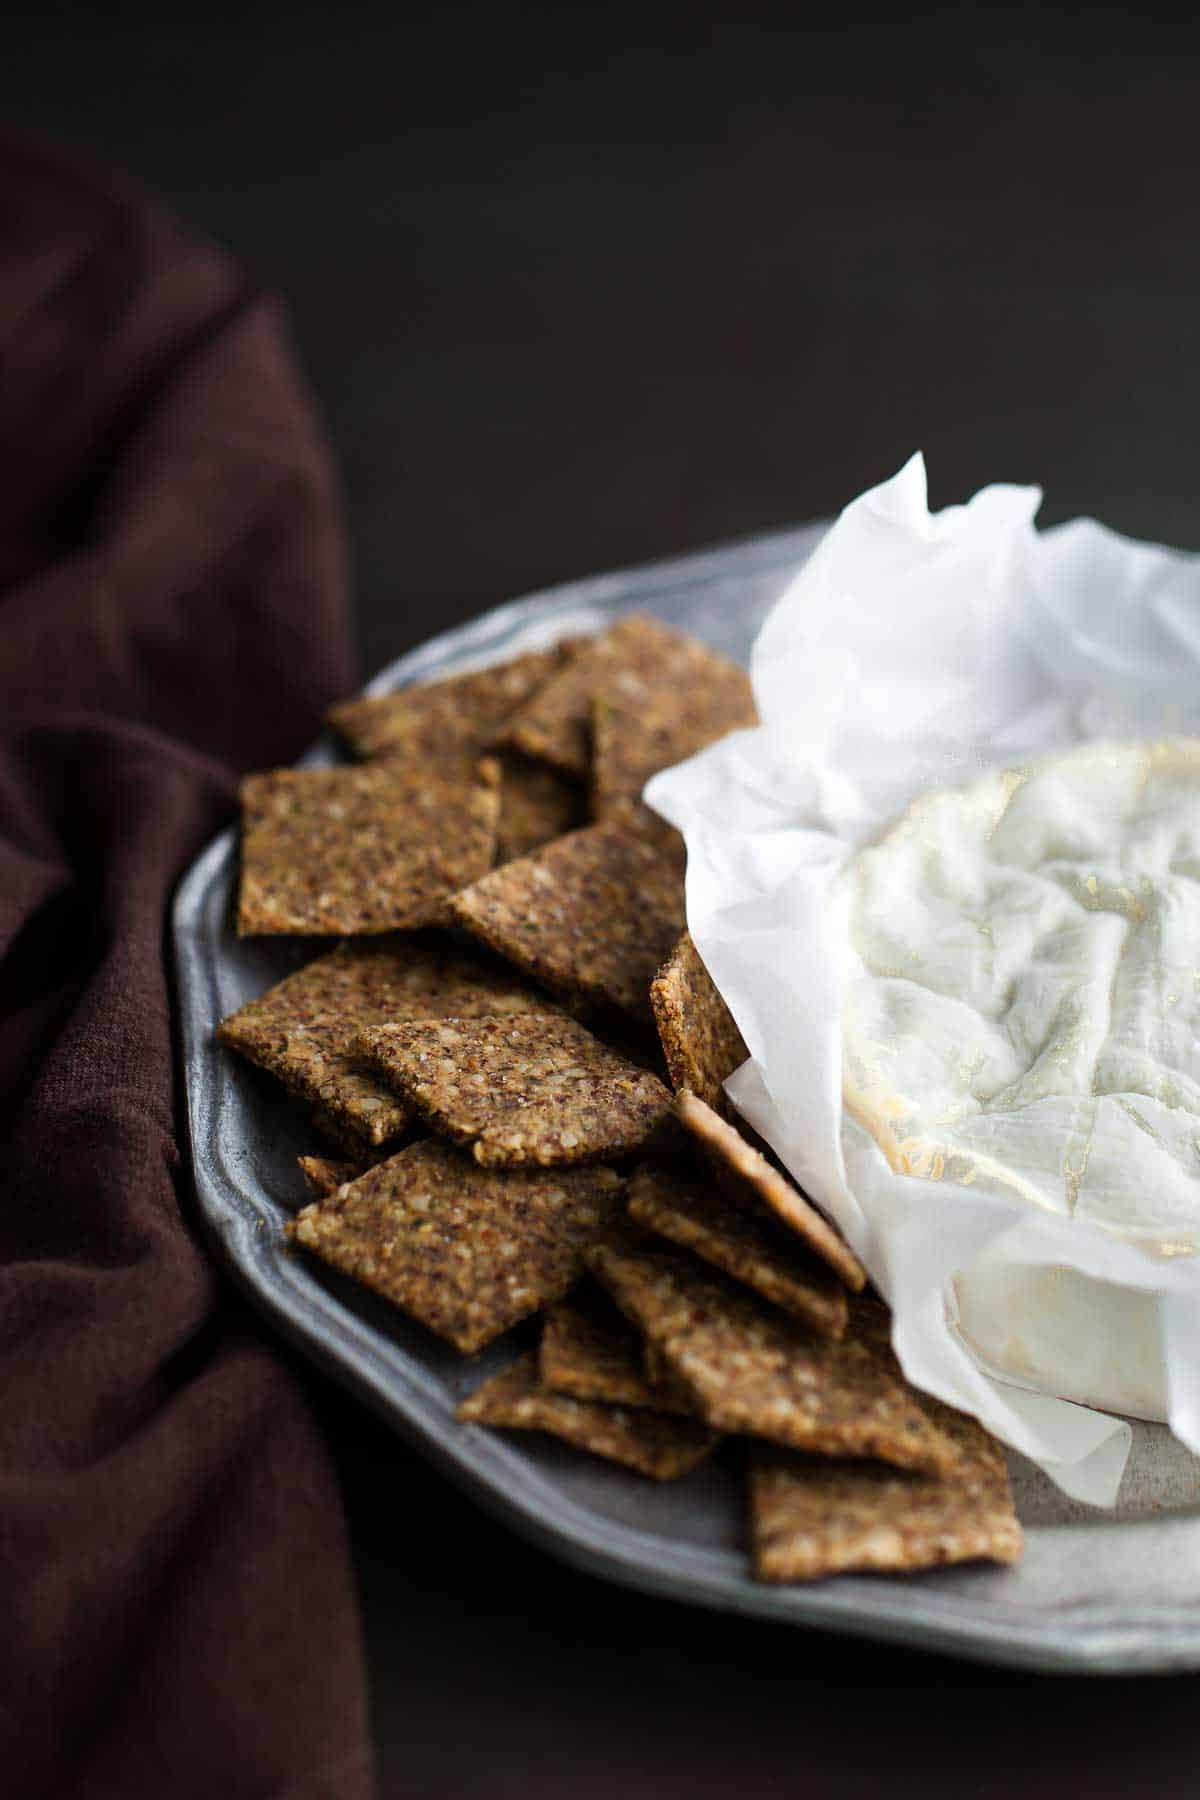 These grain-free, paleo crackers get their satisfying toasty nutty flavor from a combination of ground almonds, flax and hemp seeds.